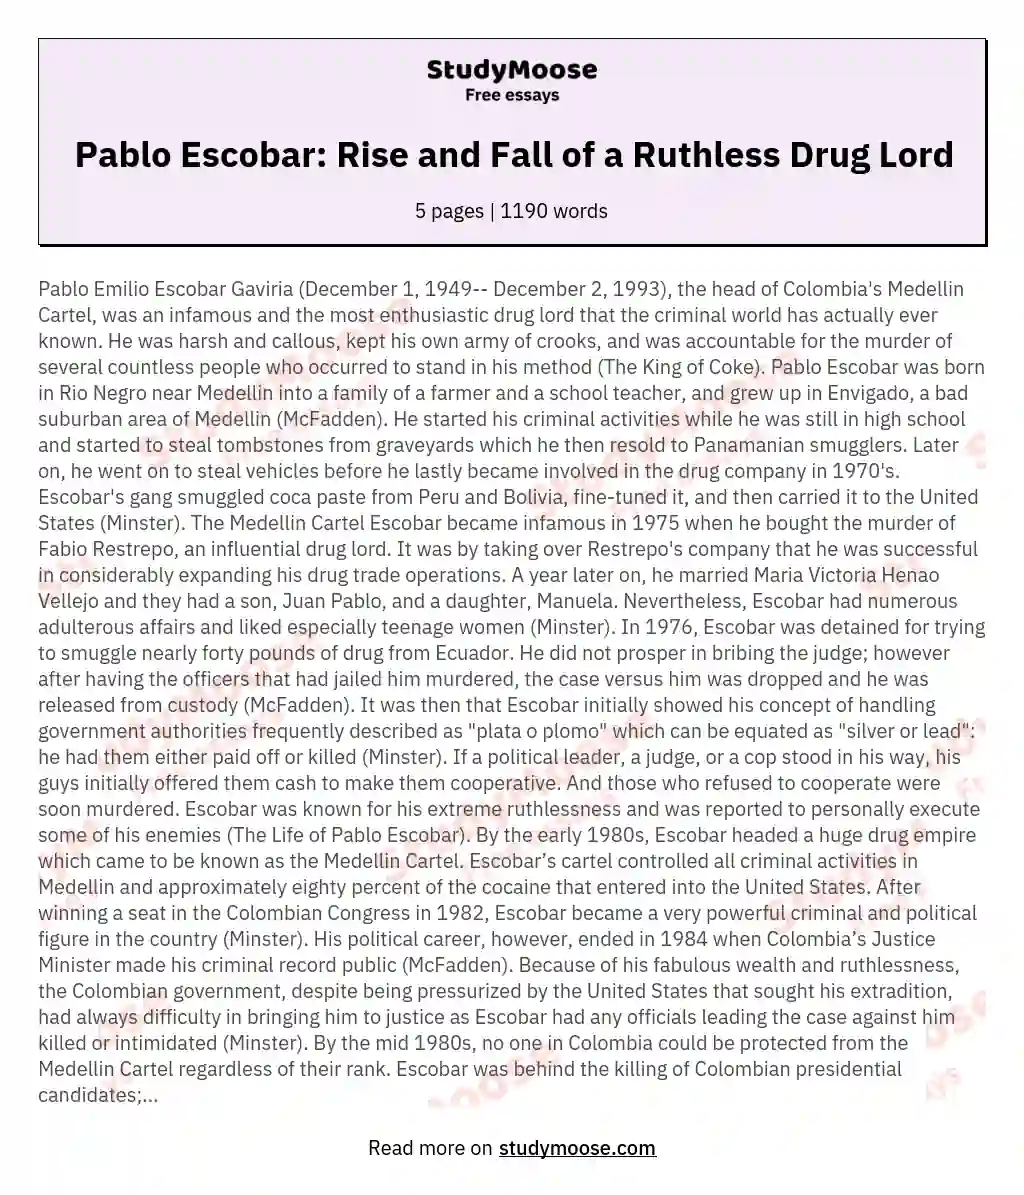 Pablo Escobar: Rise and Fall of a Ruthless Drug Lord essay